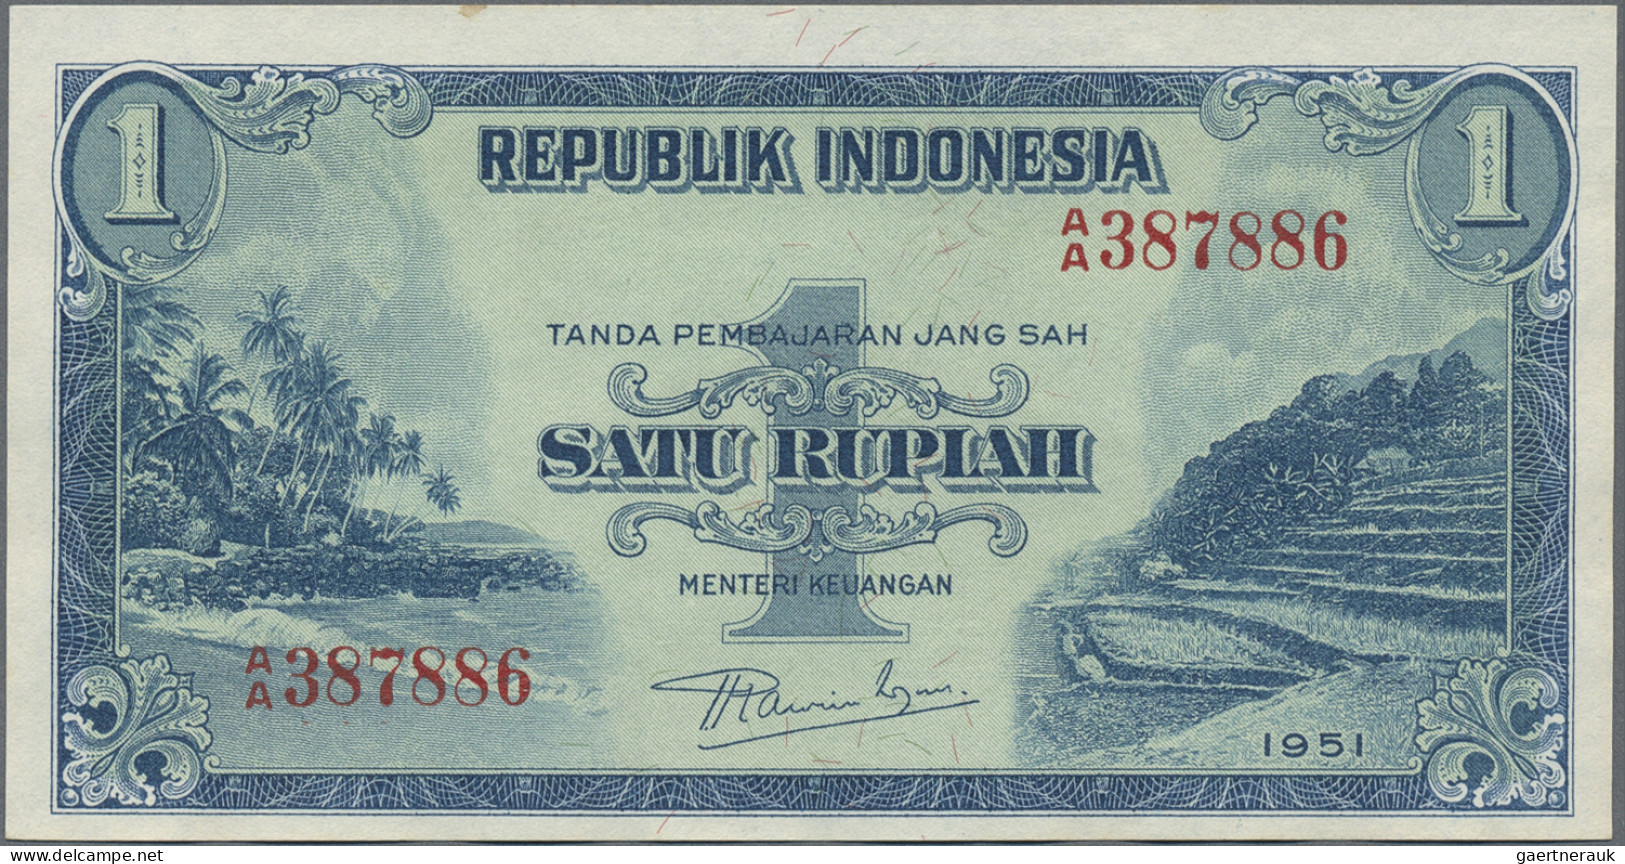 Indonesia: Republic Indonesia, Huge Lot With 17 Banknotes 1 And 2.5 Rupiah, Seri - Indonesien